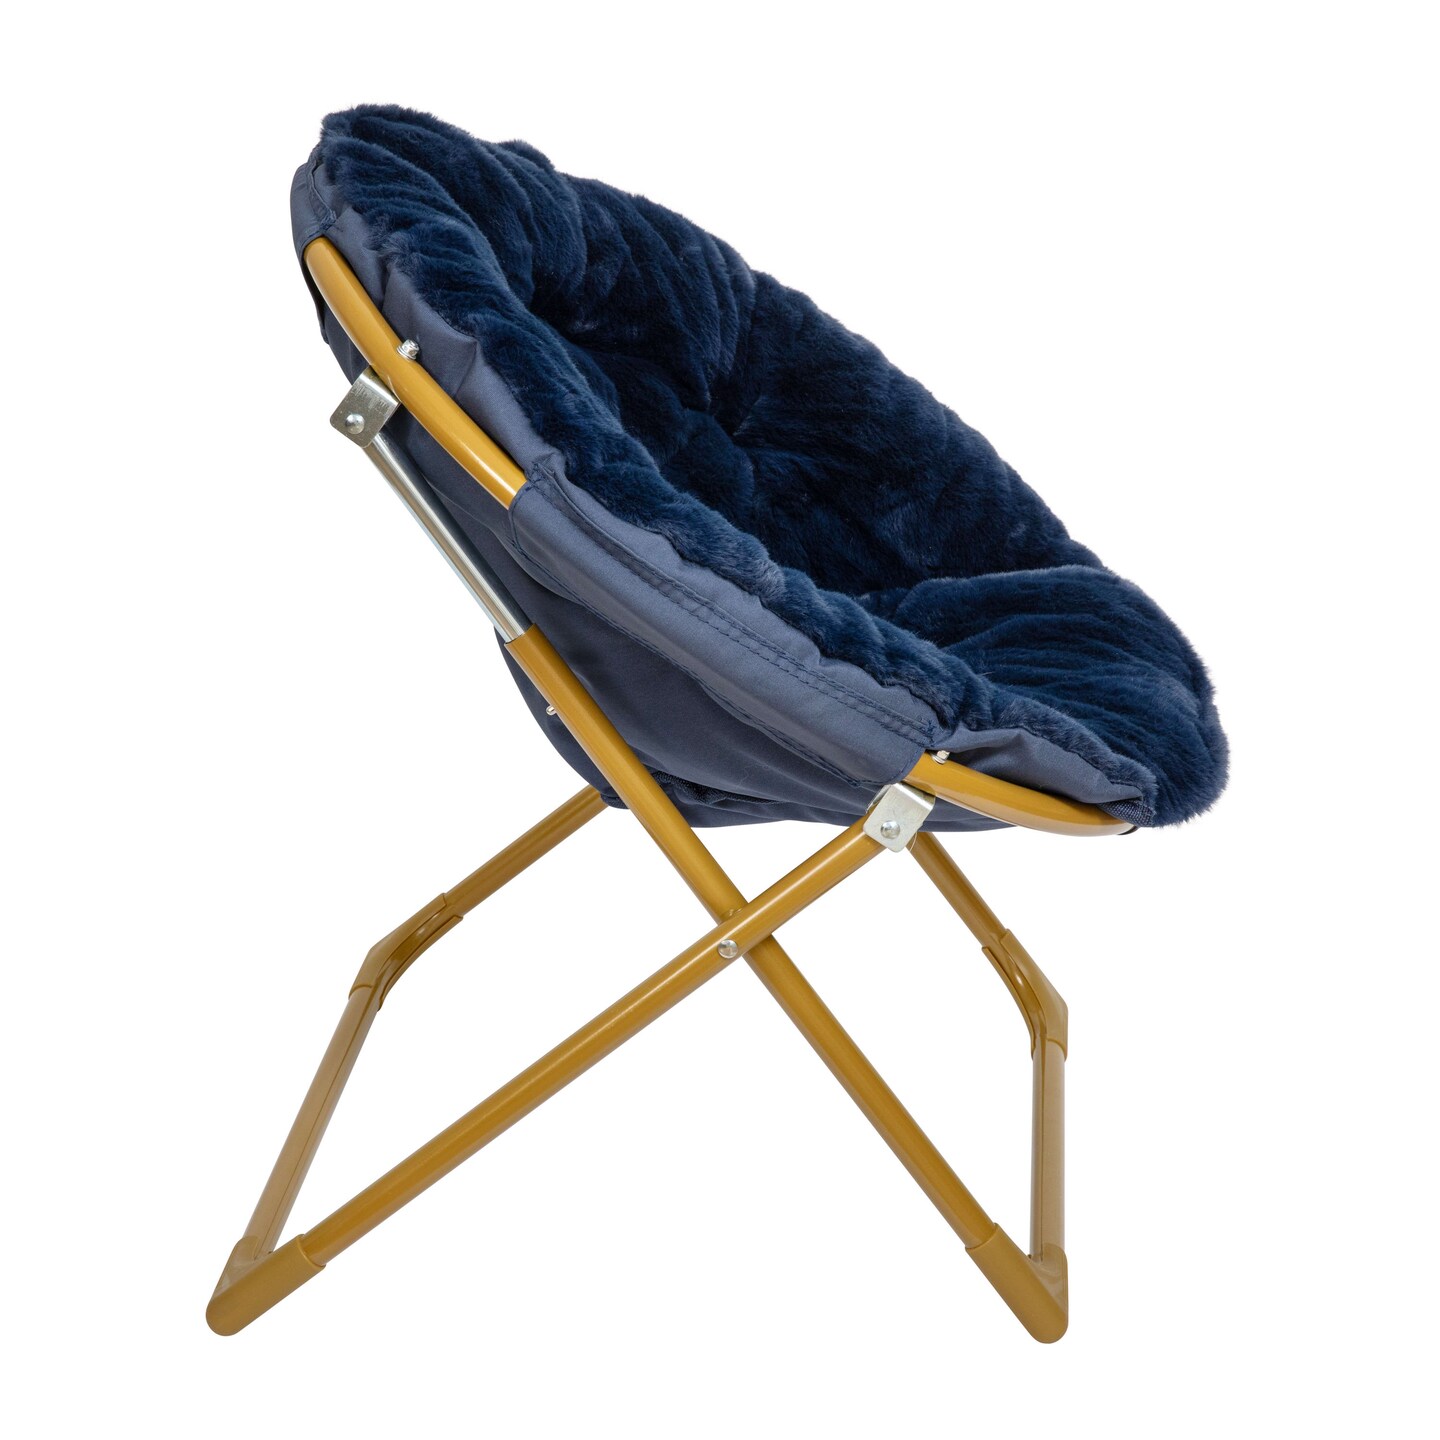 Emma and Oliver Io Kid&#x27;s Folding Saucer Chair with Cozy Faux Fur Upholstery and Metal Frame for Playroom, Bedrooms, Nursery and More